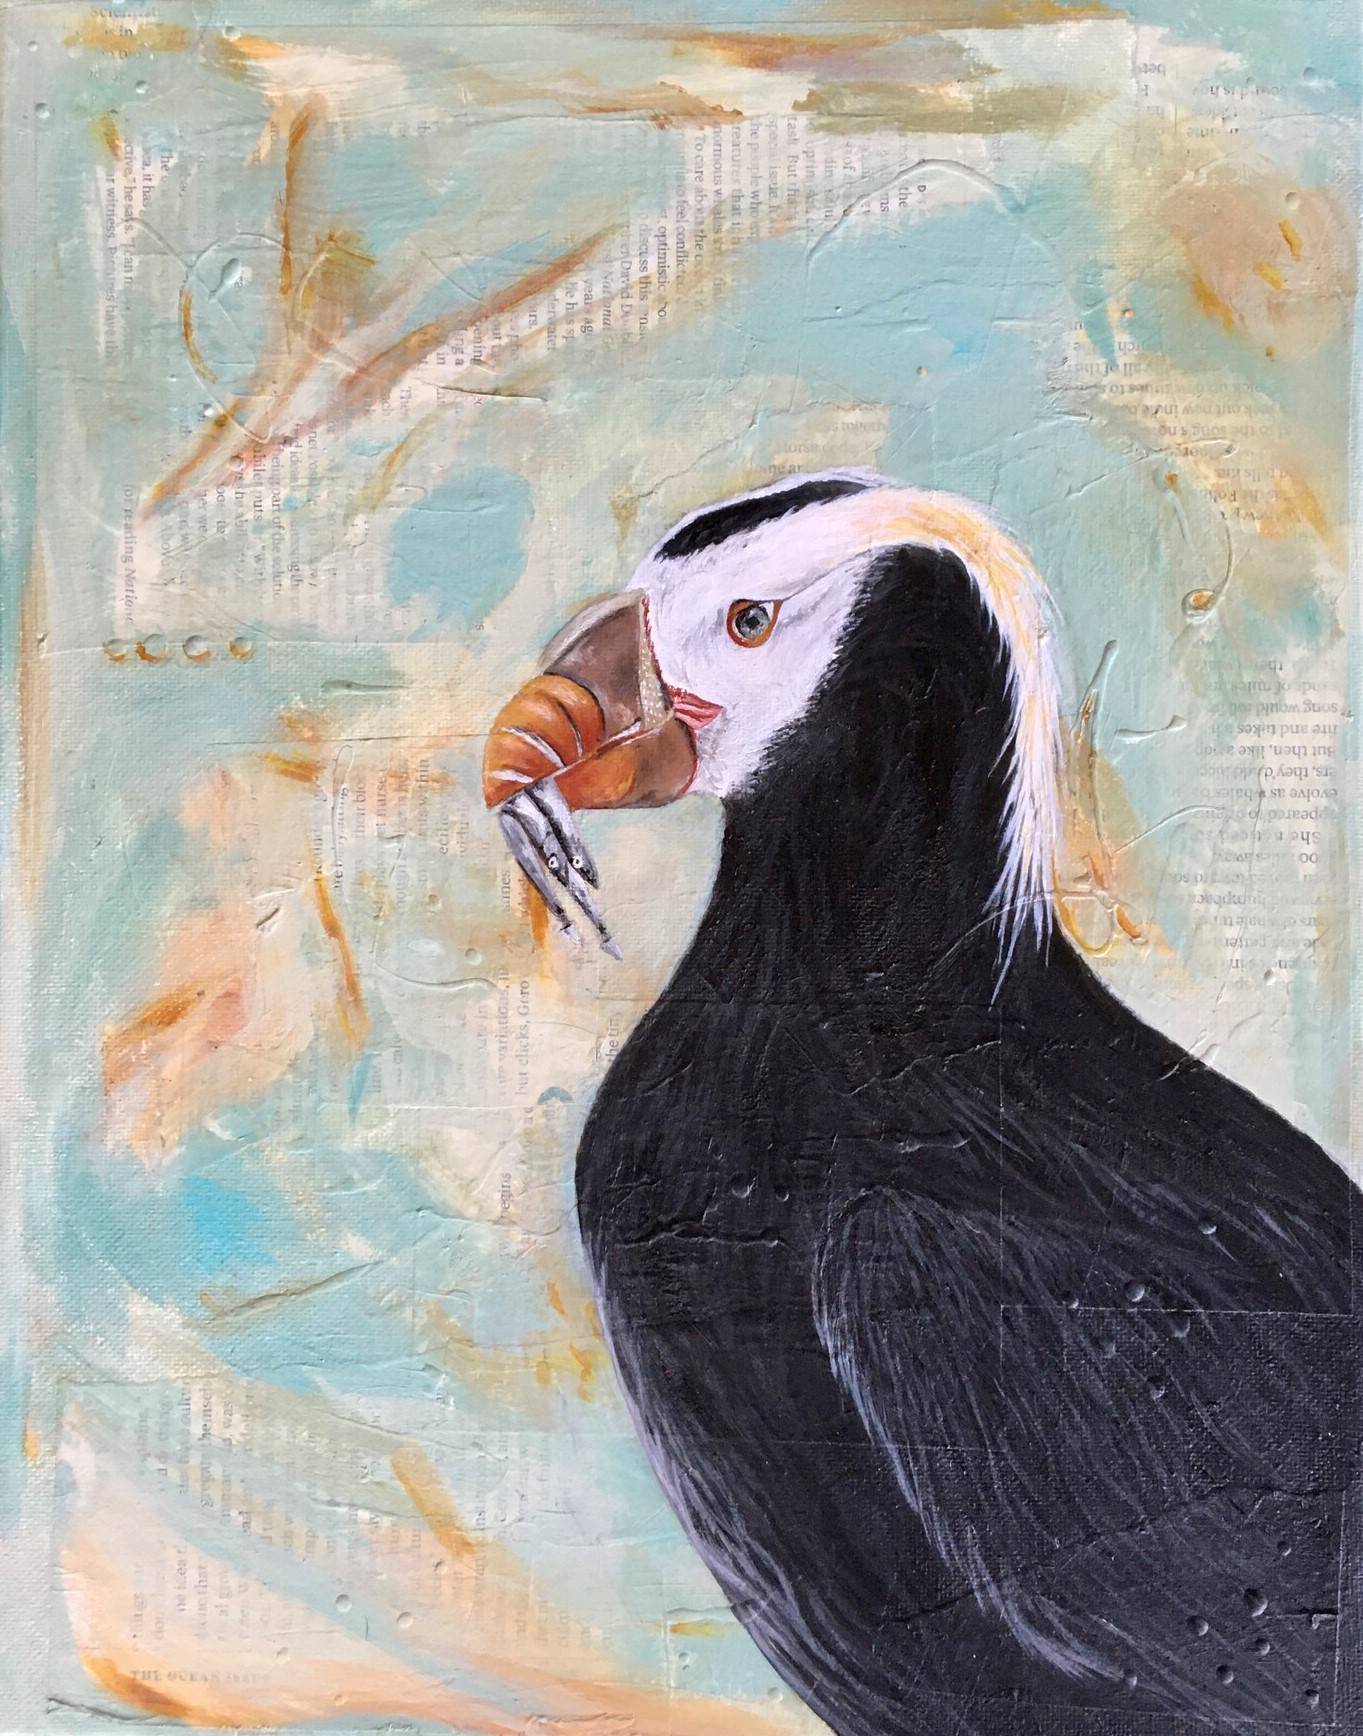 A puffin in profile hold fish in its beak. The background is painted over words, hard to make out.